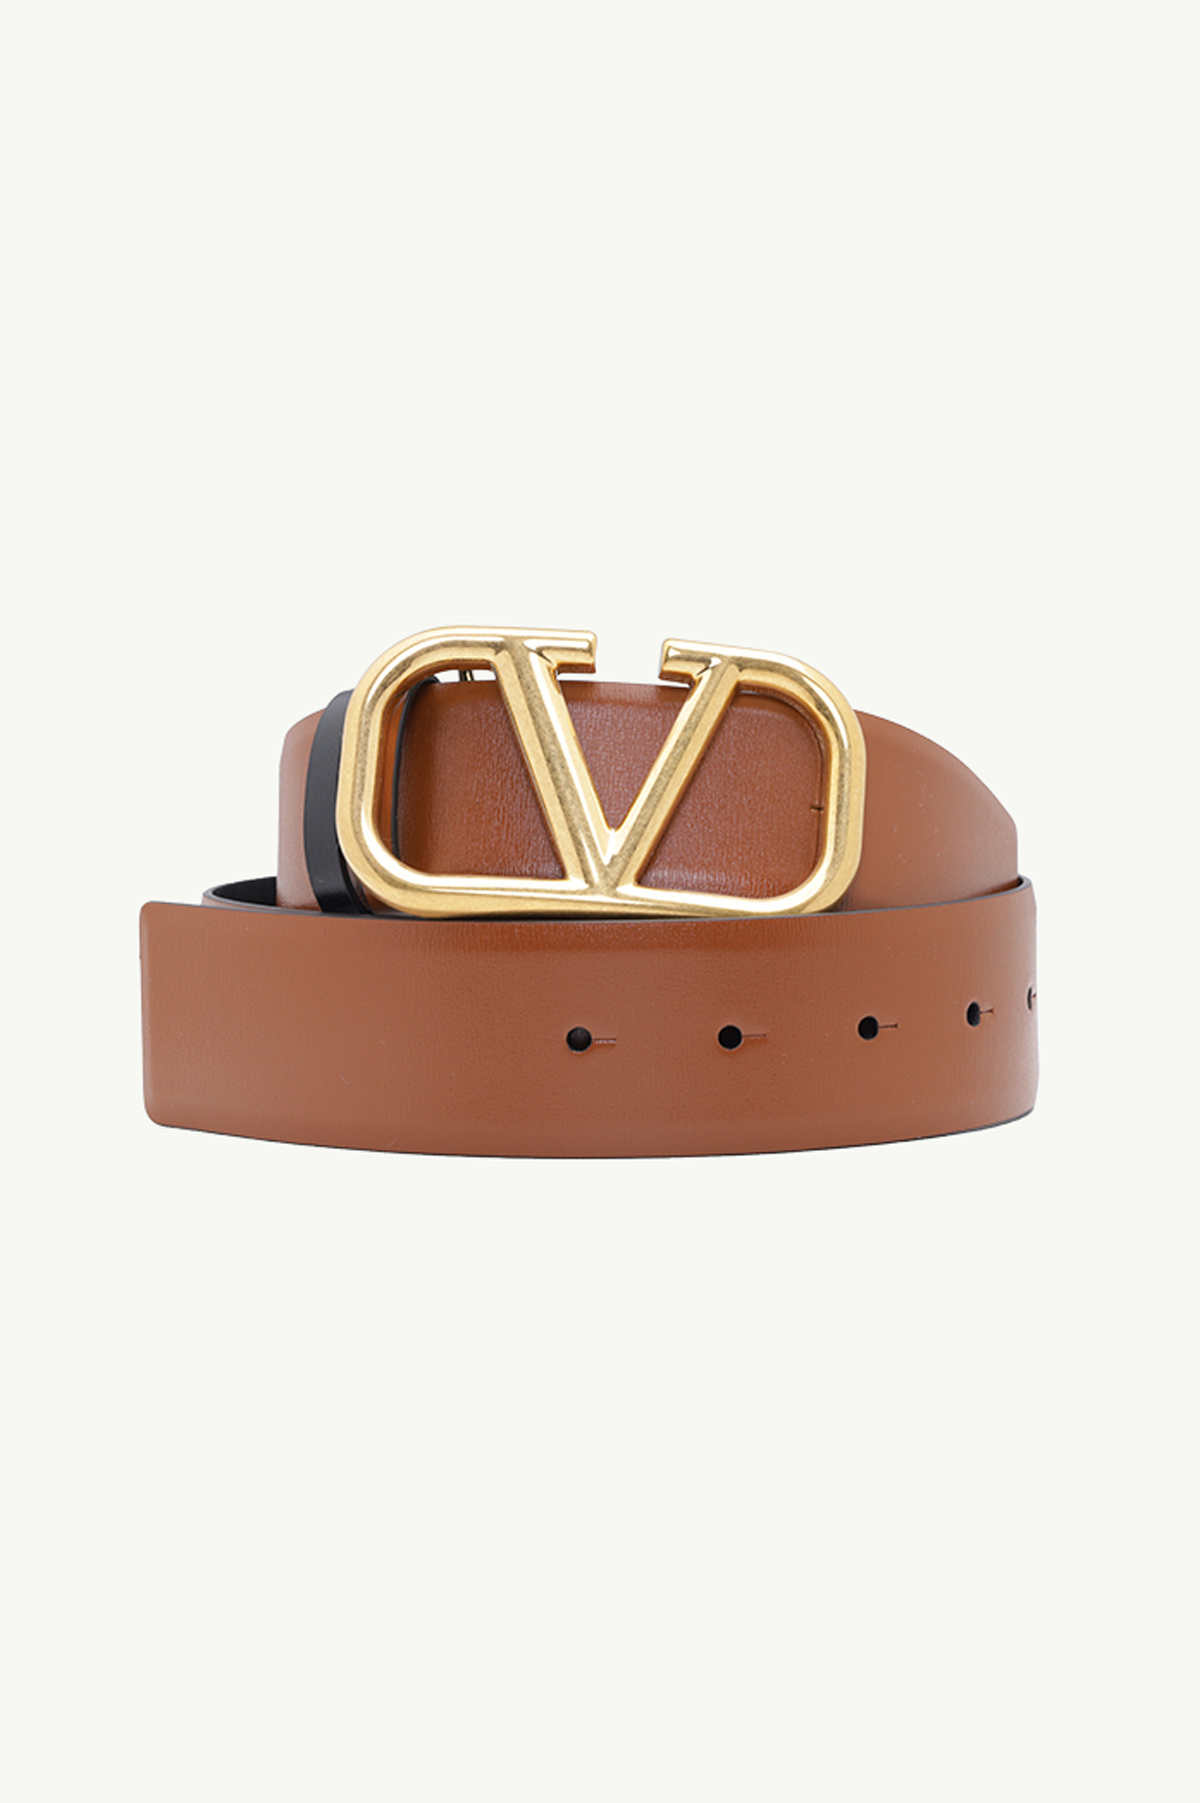 VALENTINO Reversible Belt 4cm in Black/Brown Leather with VLogo Buckle 1